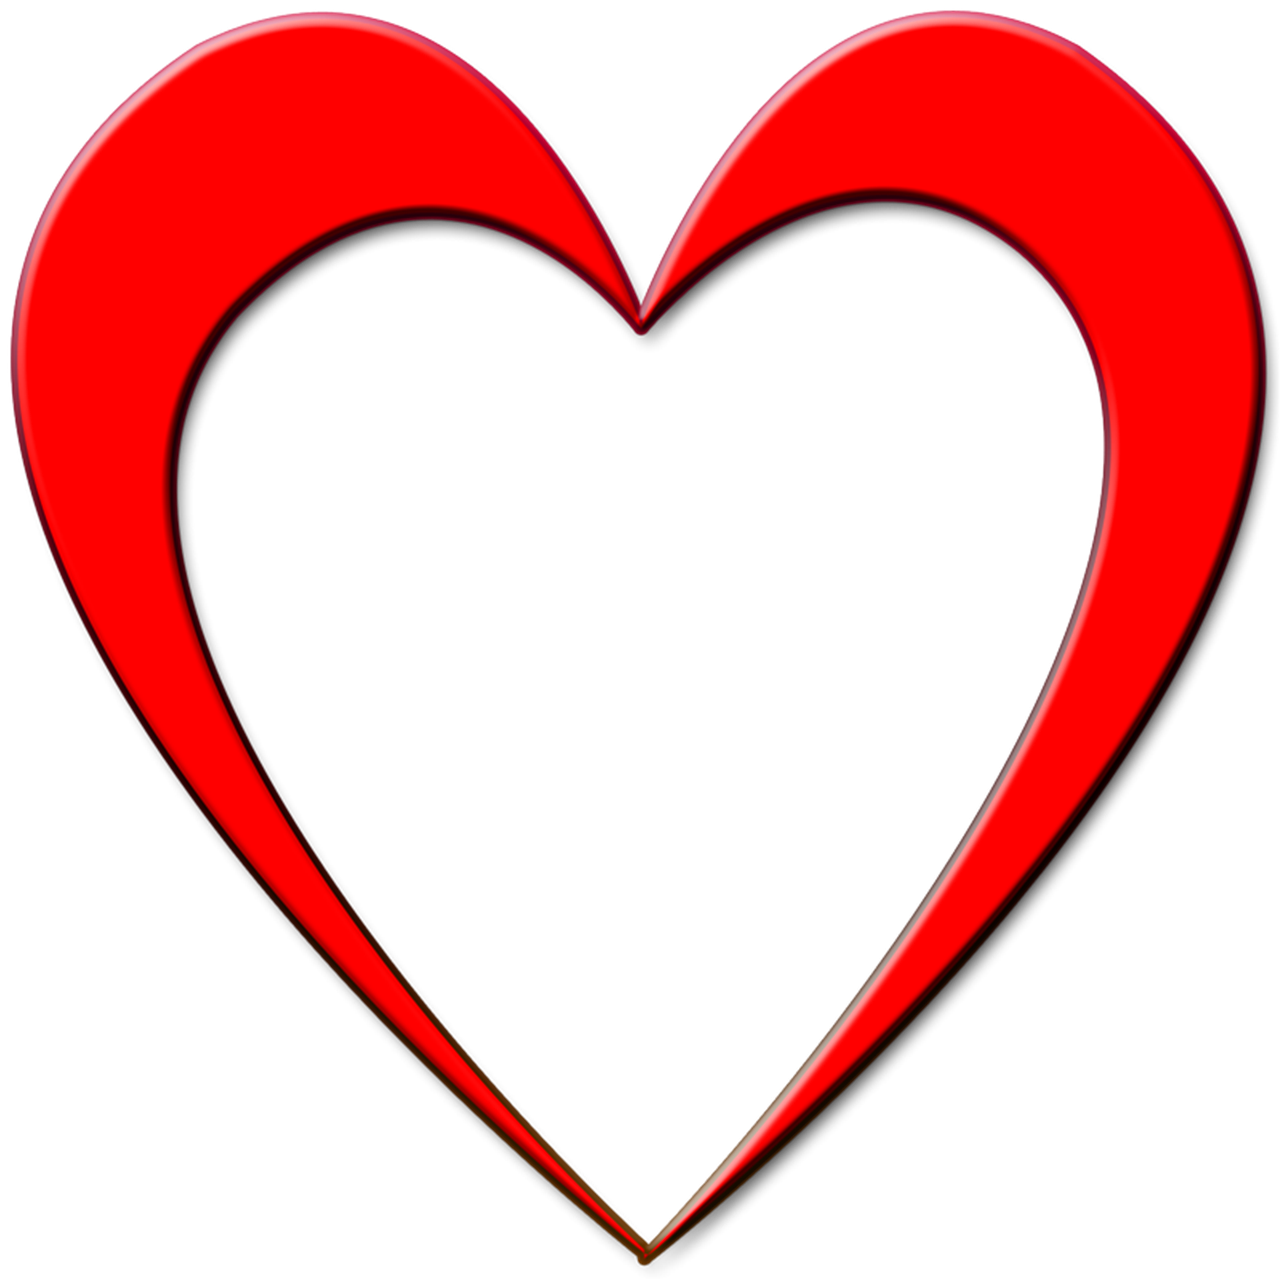 red heart outline free photo